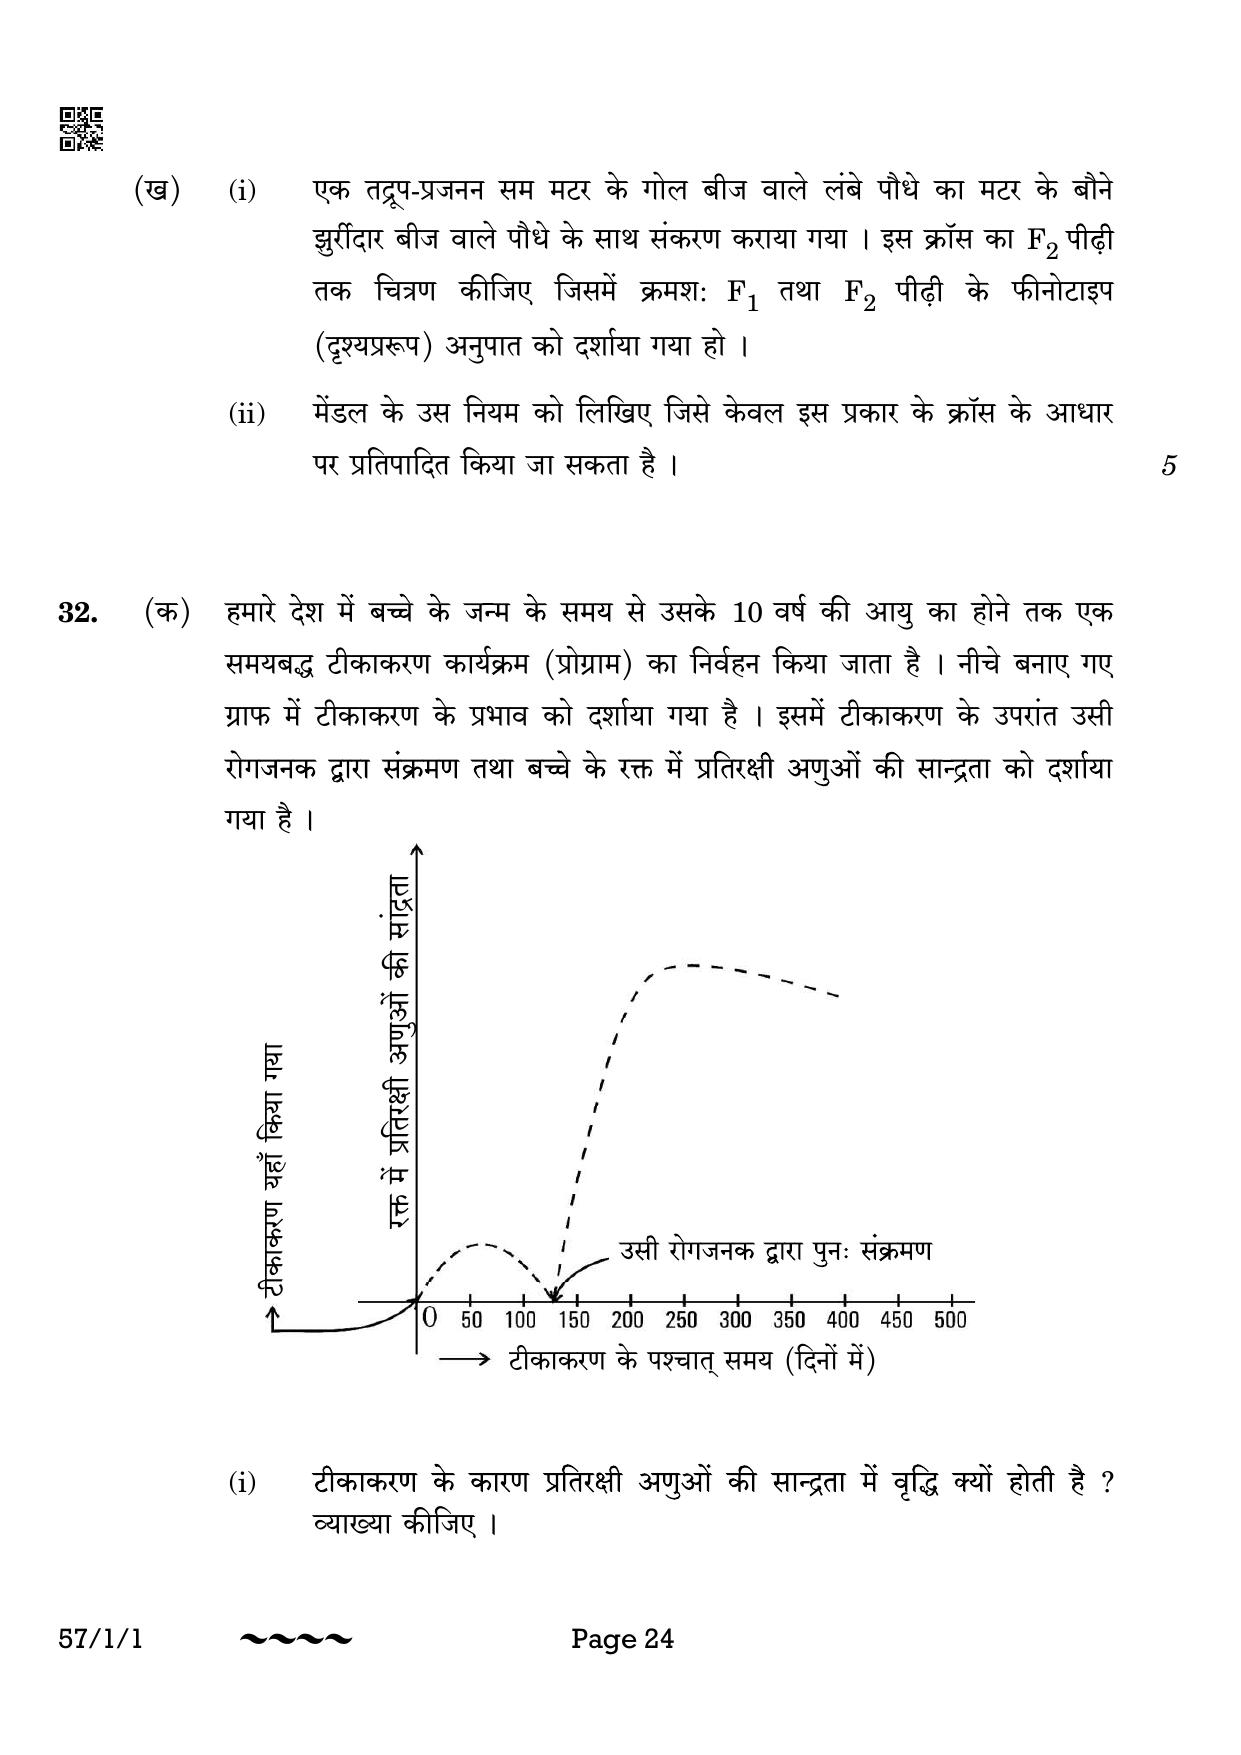 CBSE Class 12 57-1-1 Biology 2023 Question Paper - Page 24